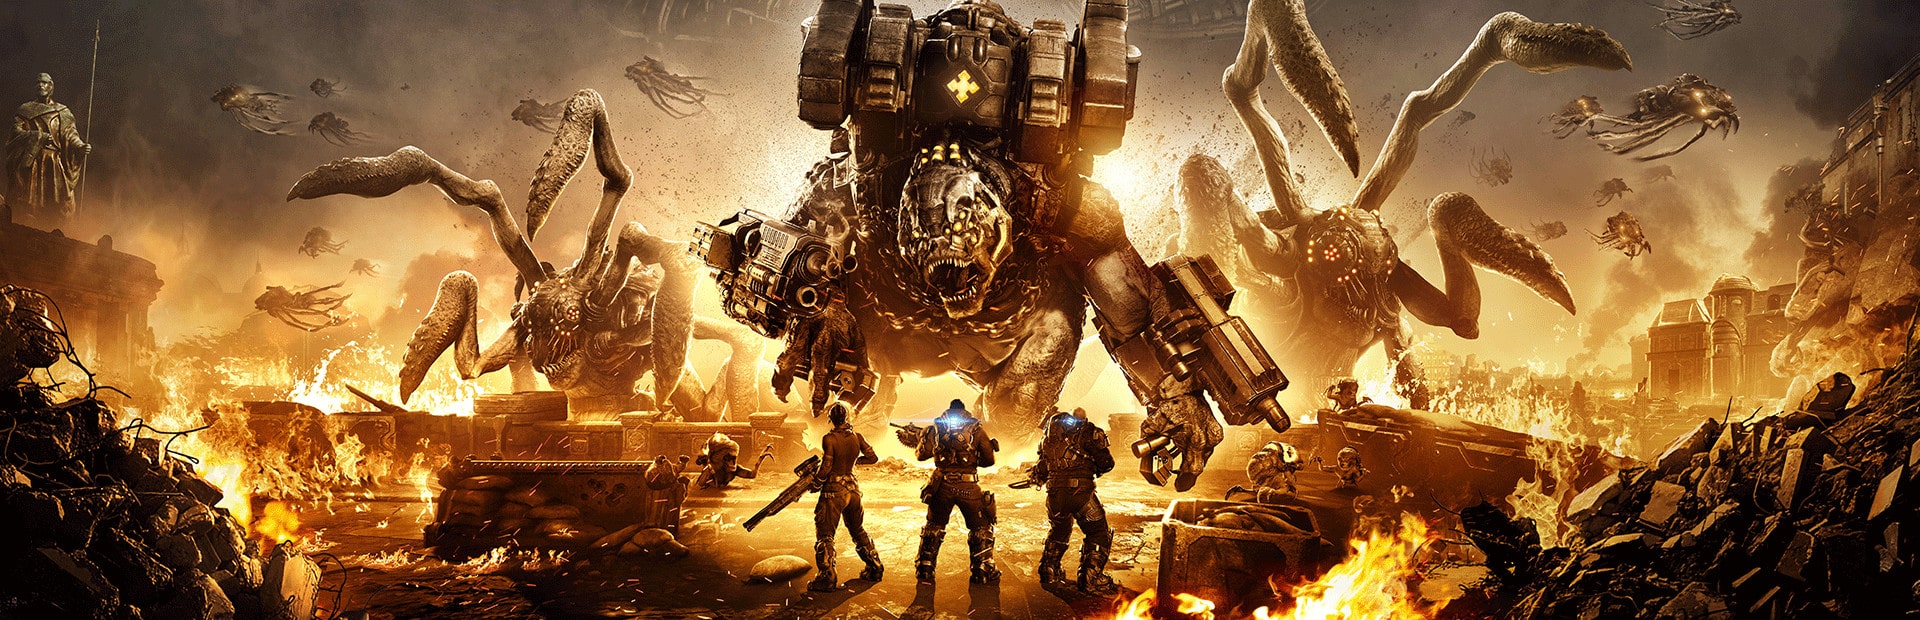 Gears Tactics Review: A Turn-Based Strategy Game With Gears at the Center